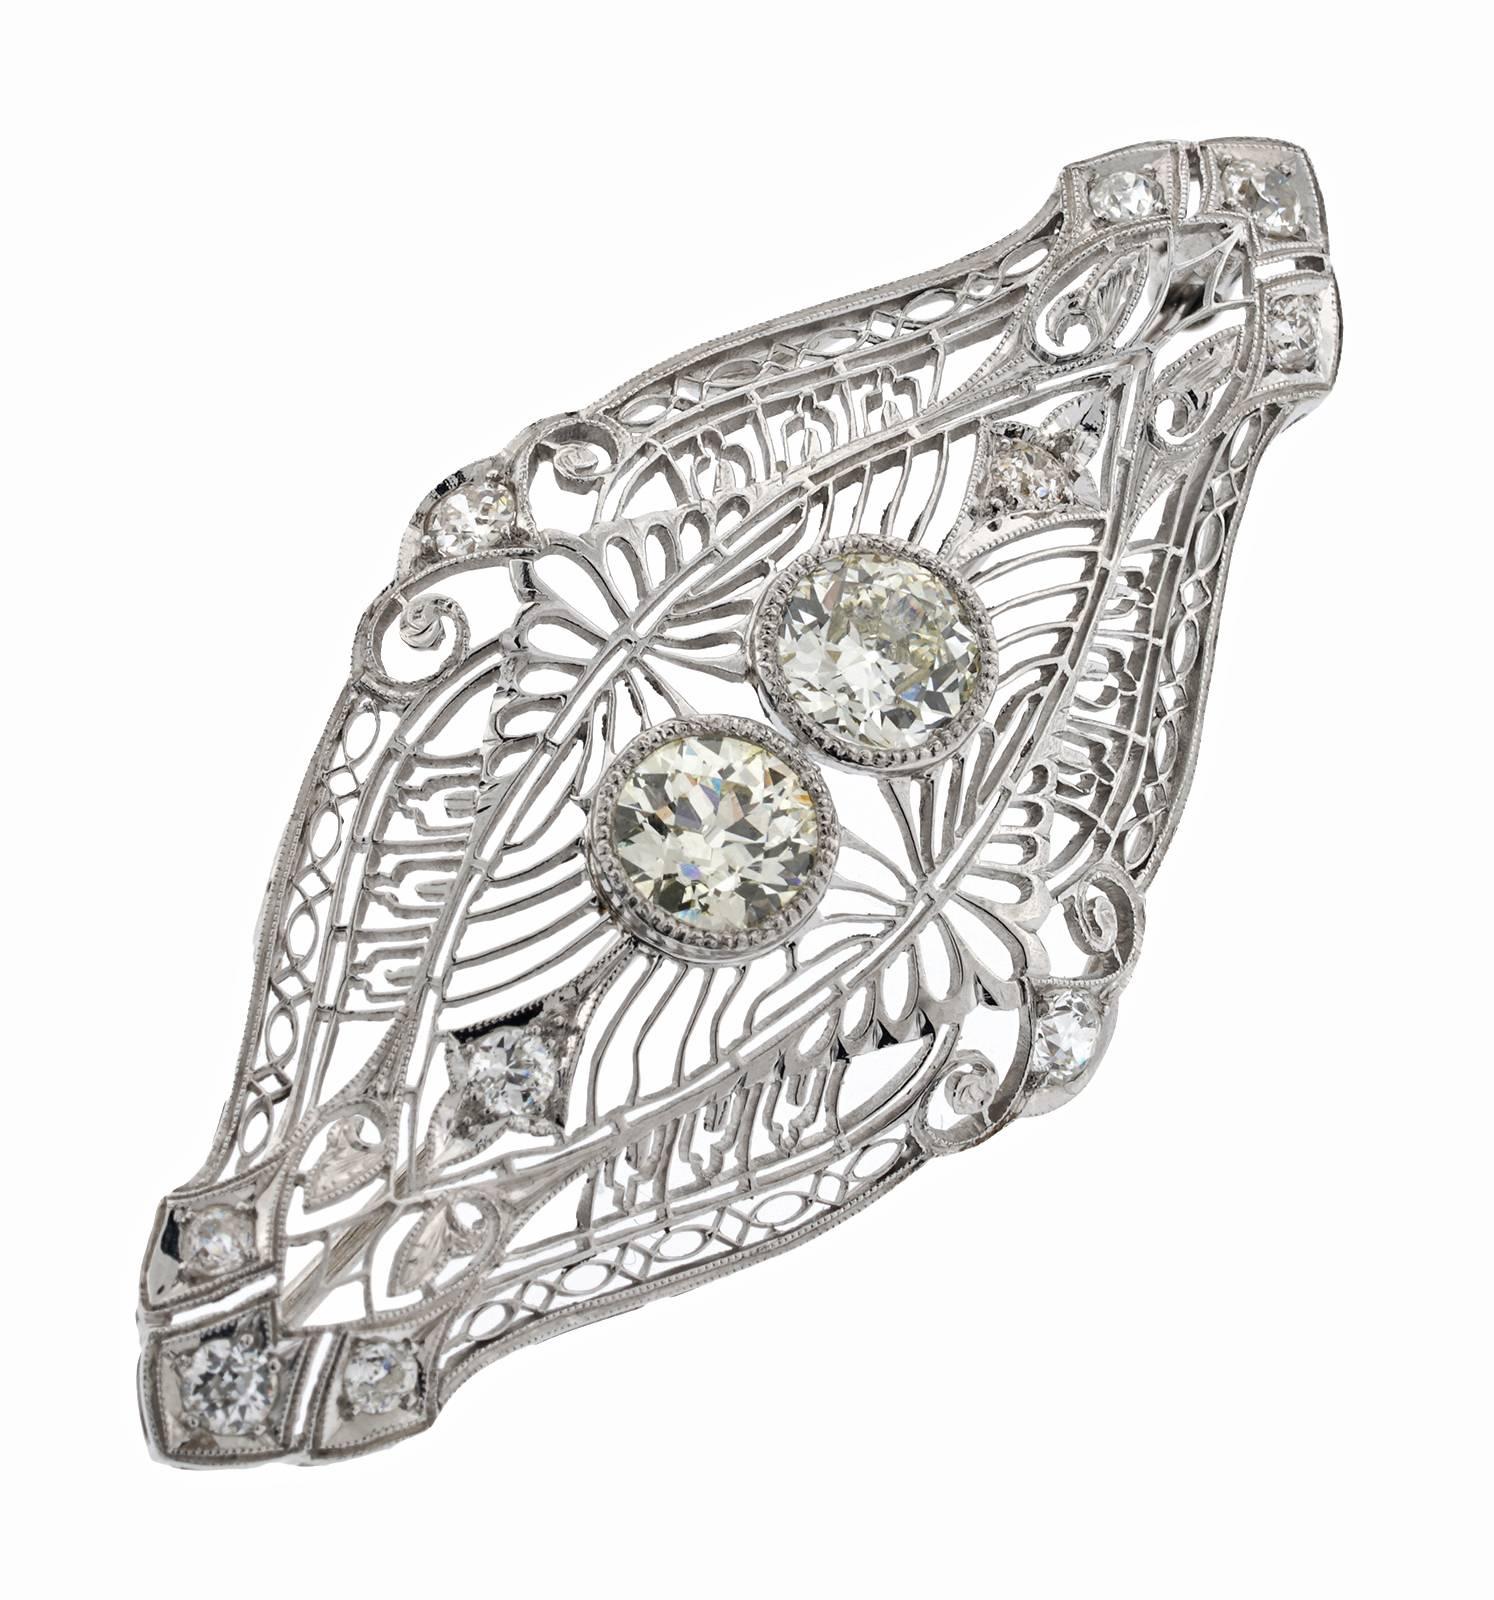 Antique Platinum Pin, convertible to pendant with rings on reverse.  Contains 2 European cut diamonds for a total 2.20ct, they are K/L color VS2 Clarity.  It also contains 10 European cut diamonds totaling 1.20cts, which range from H-J Color and